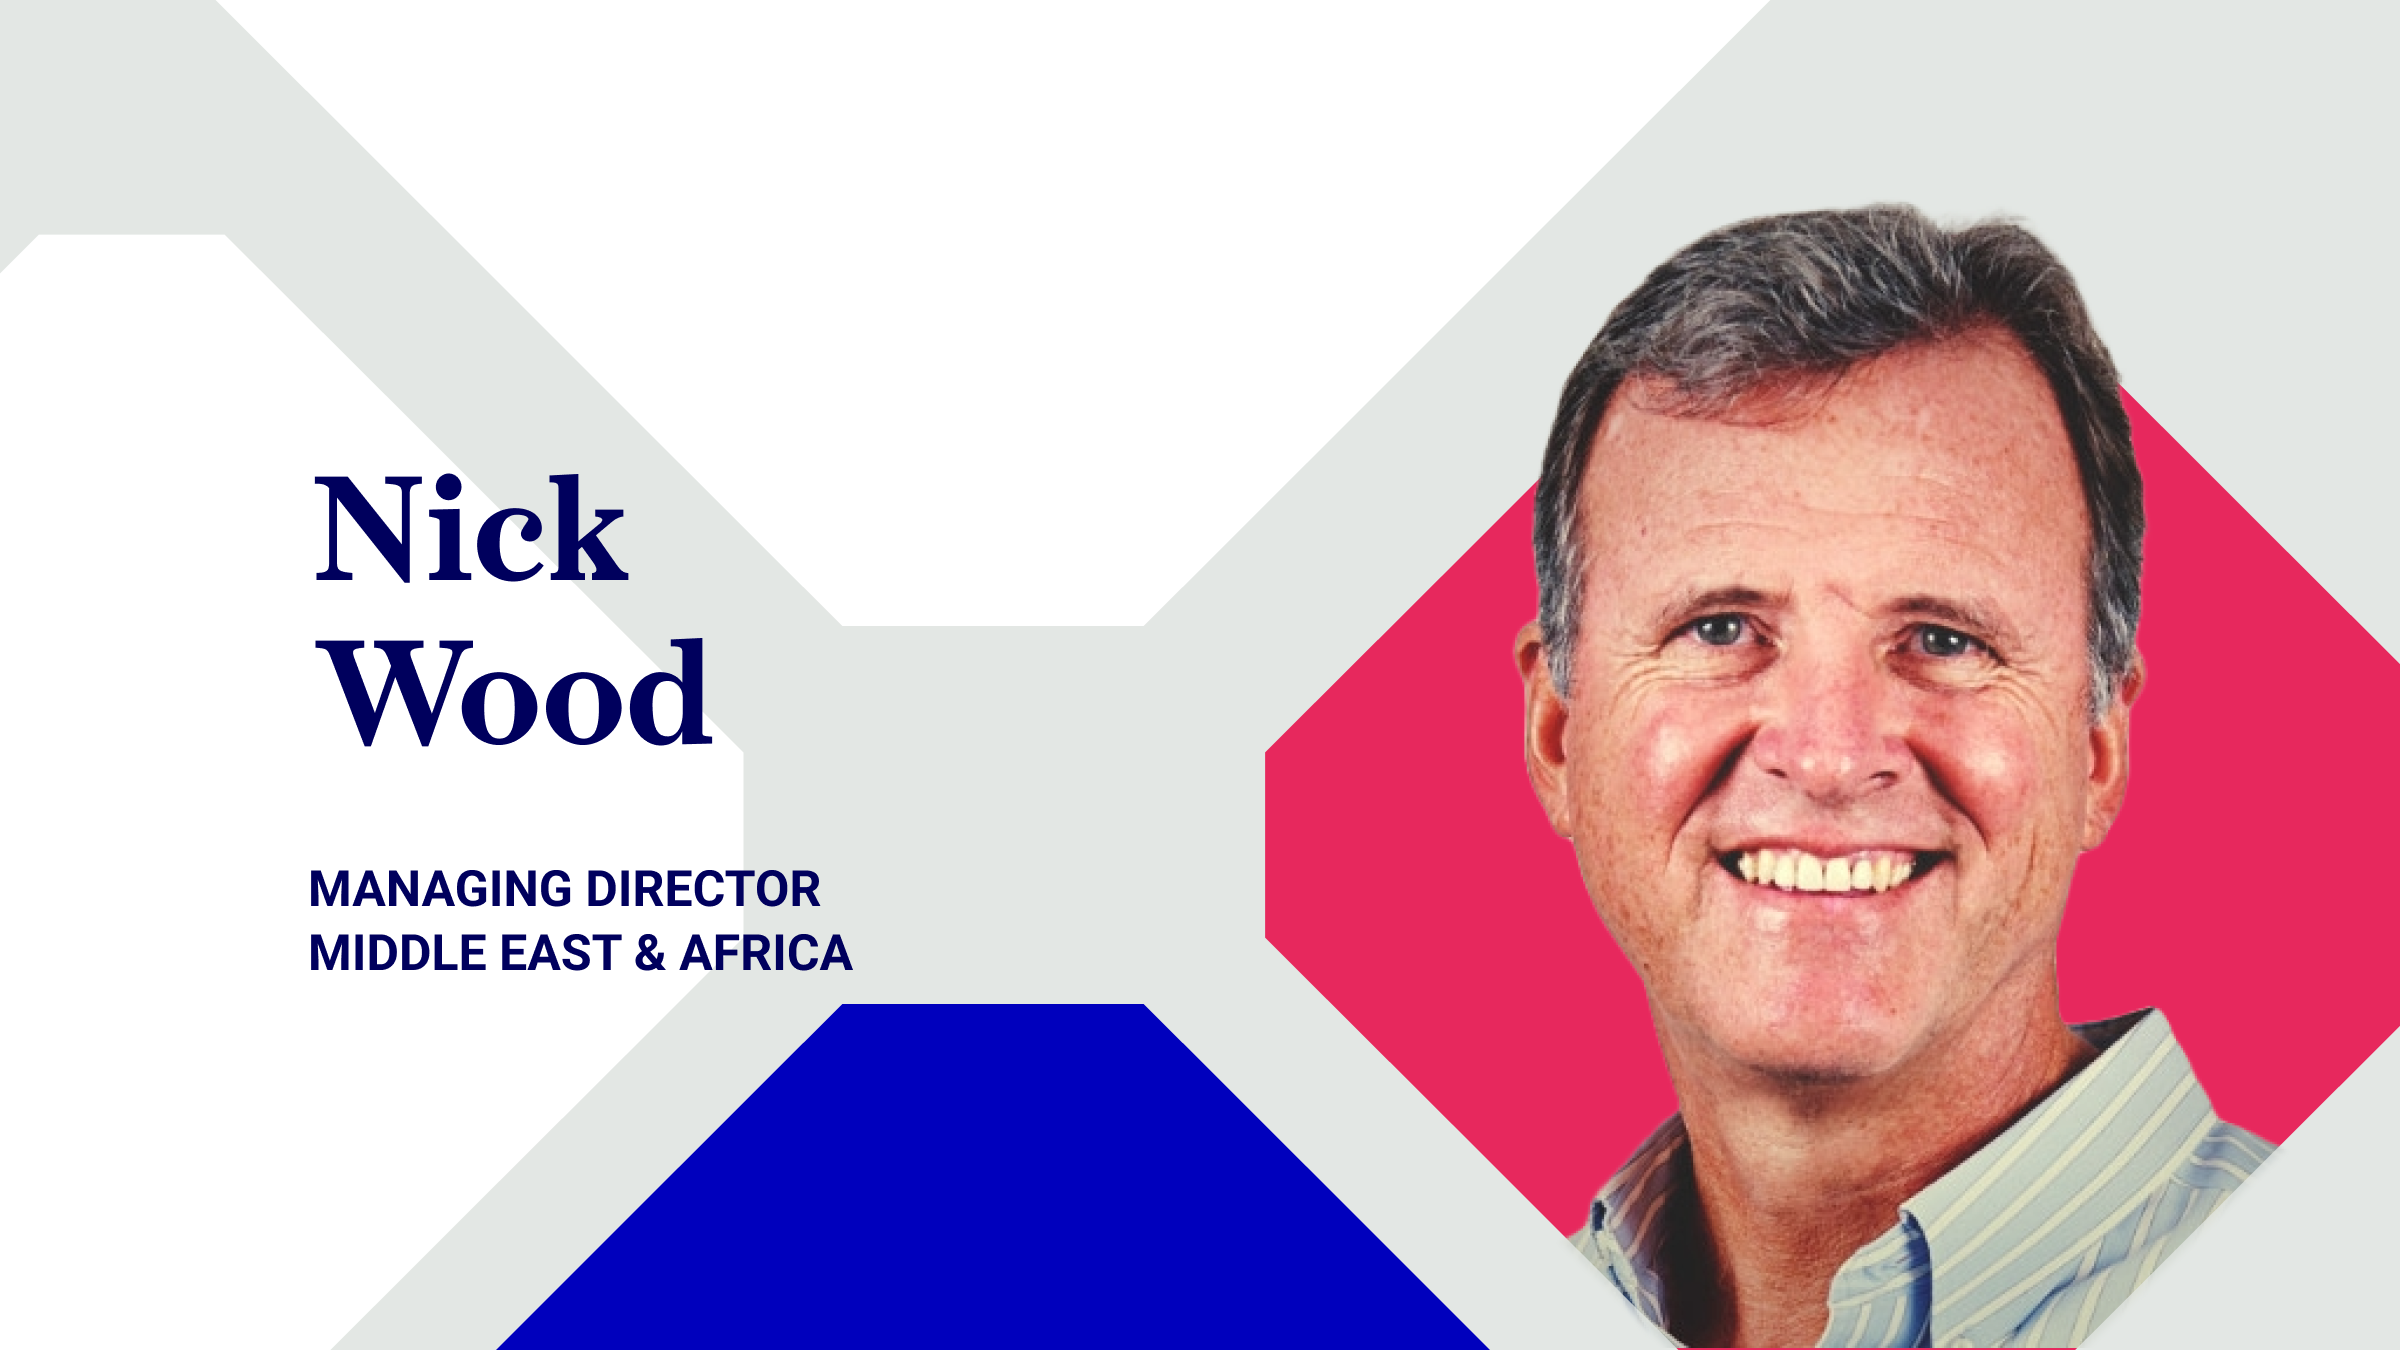 Meet Nick Wood, Managing Director Middle East & Africa